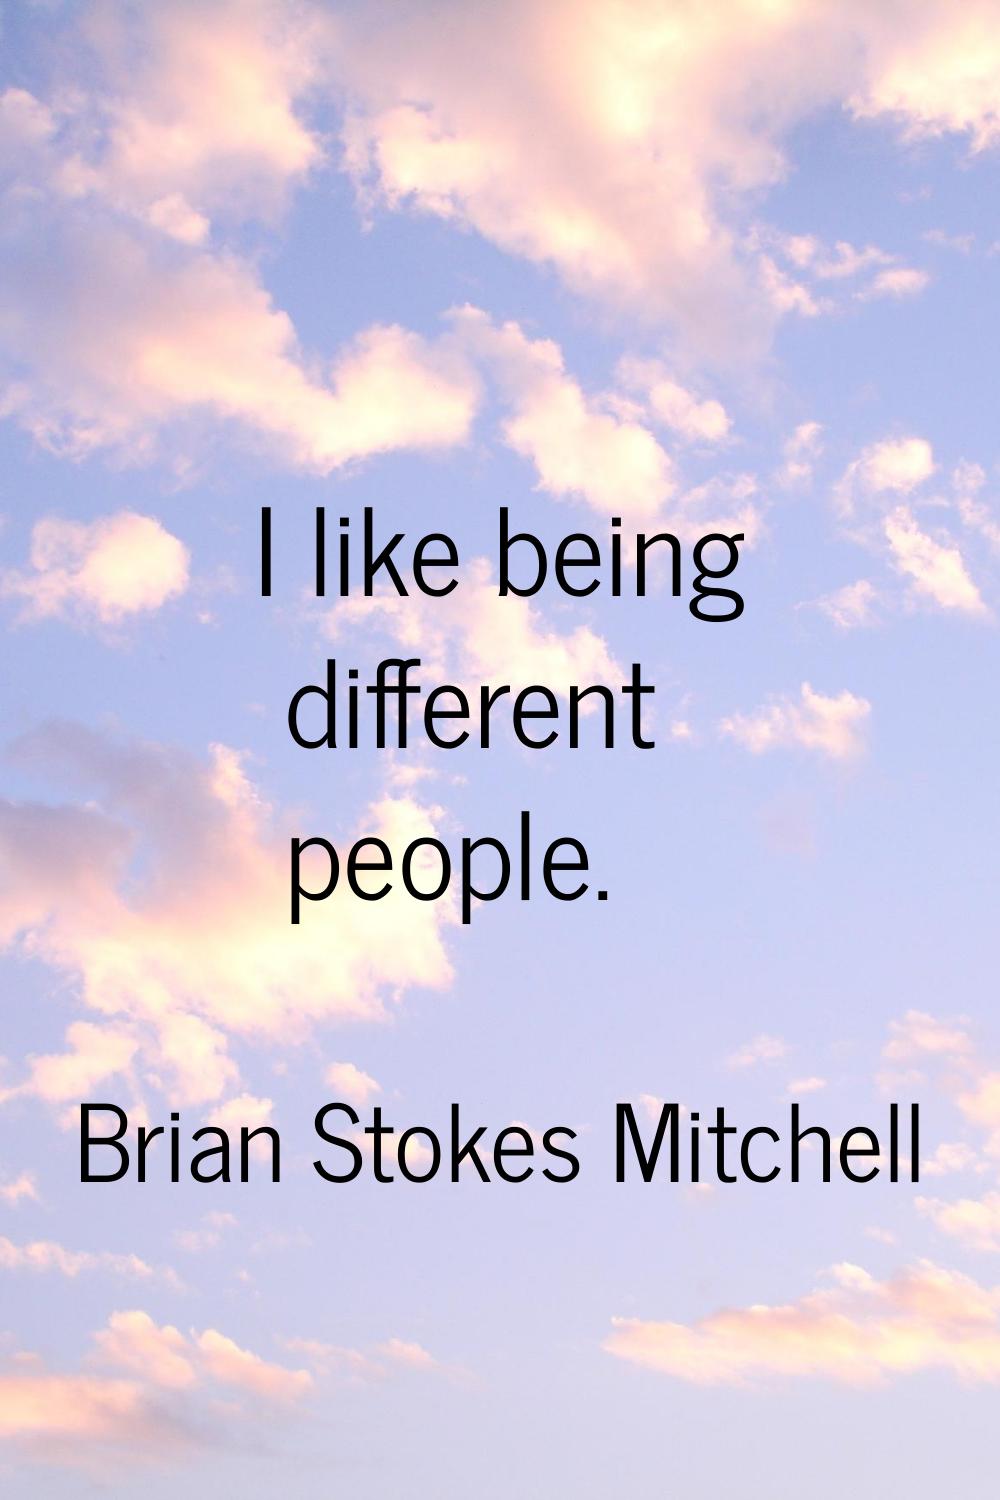 I like being different people.